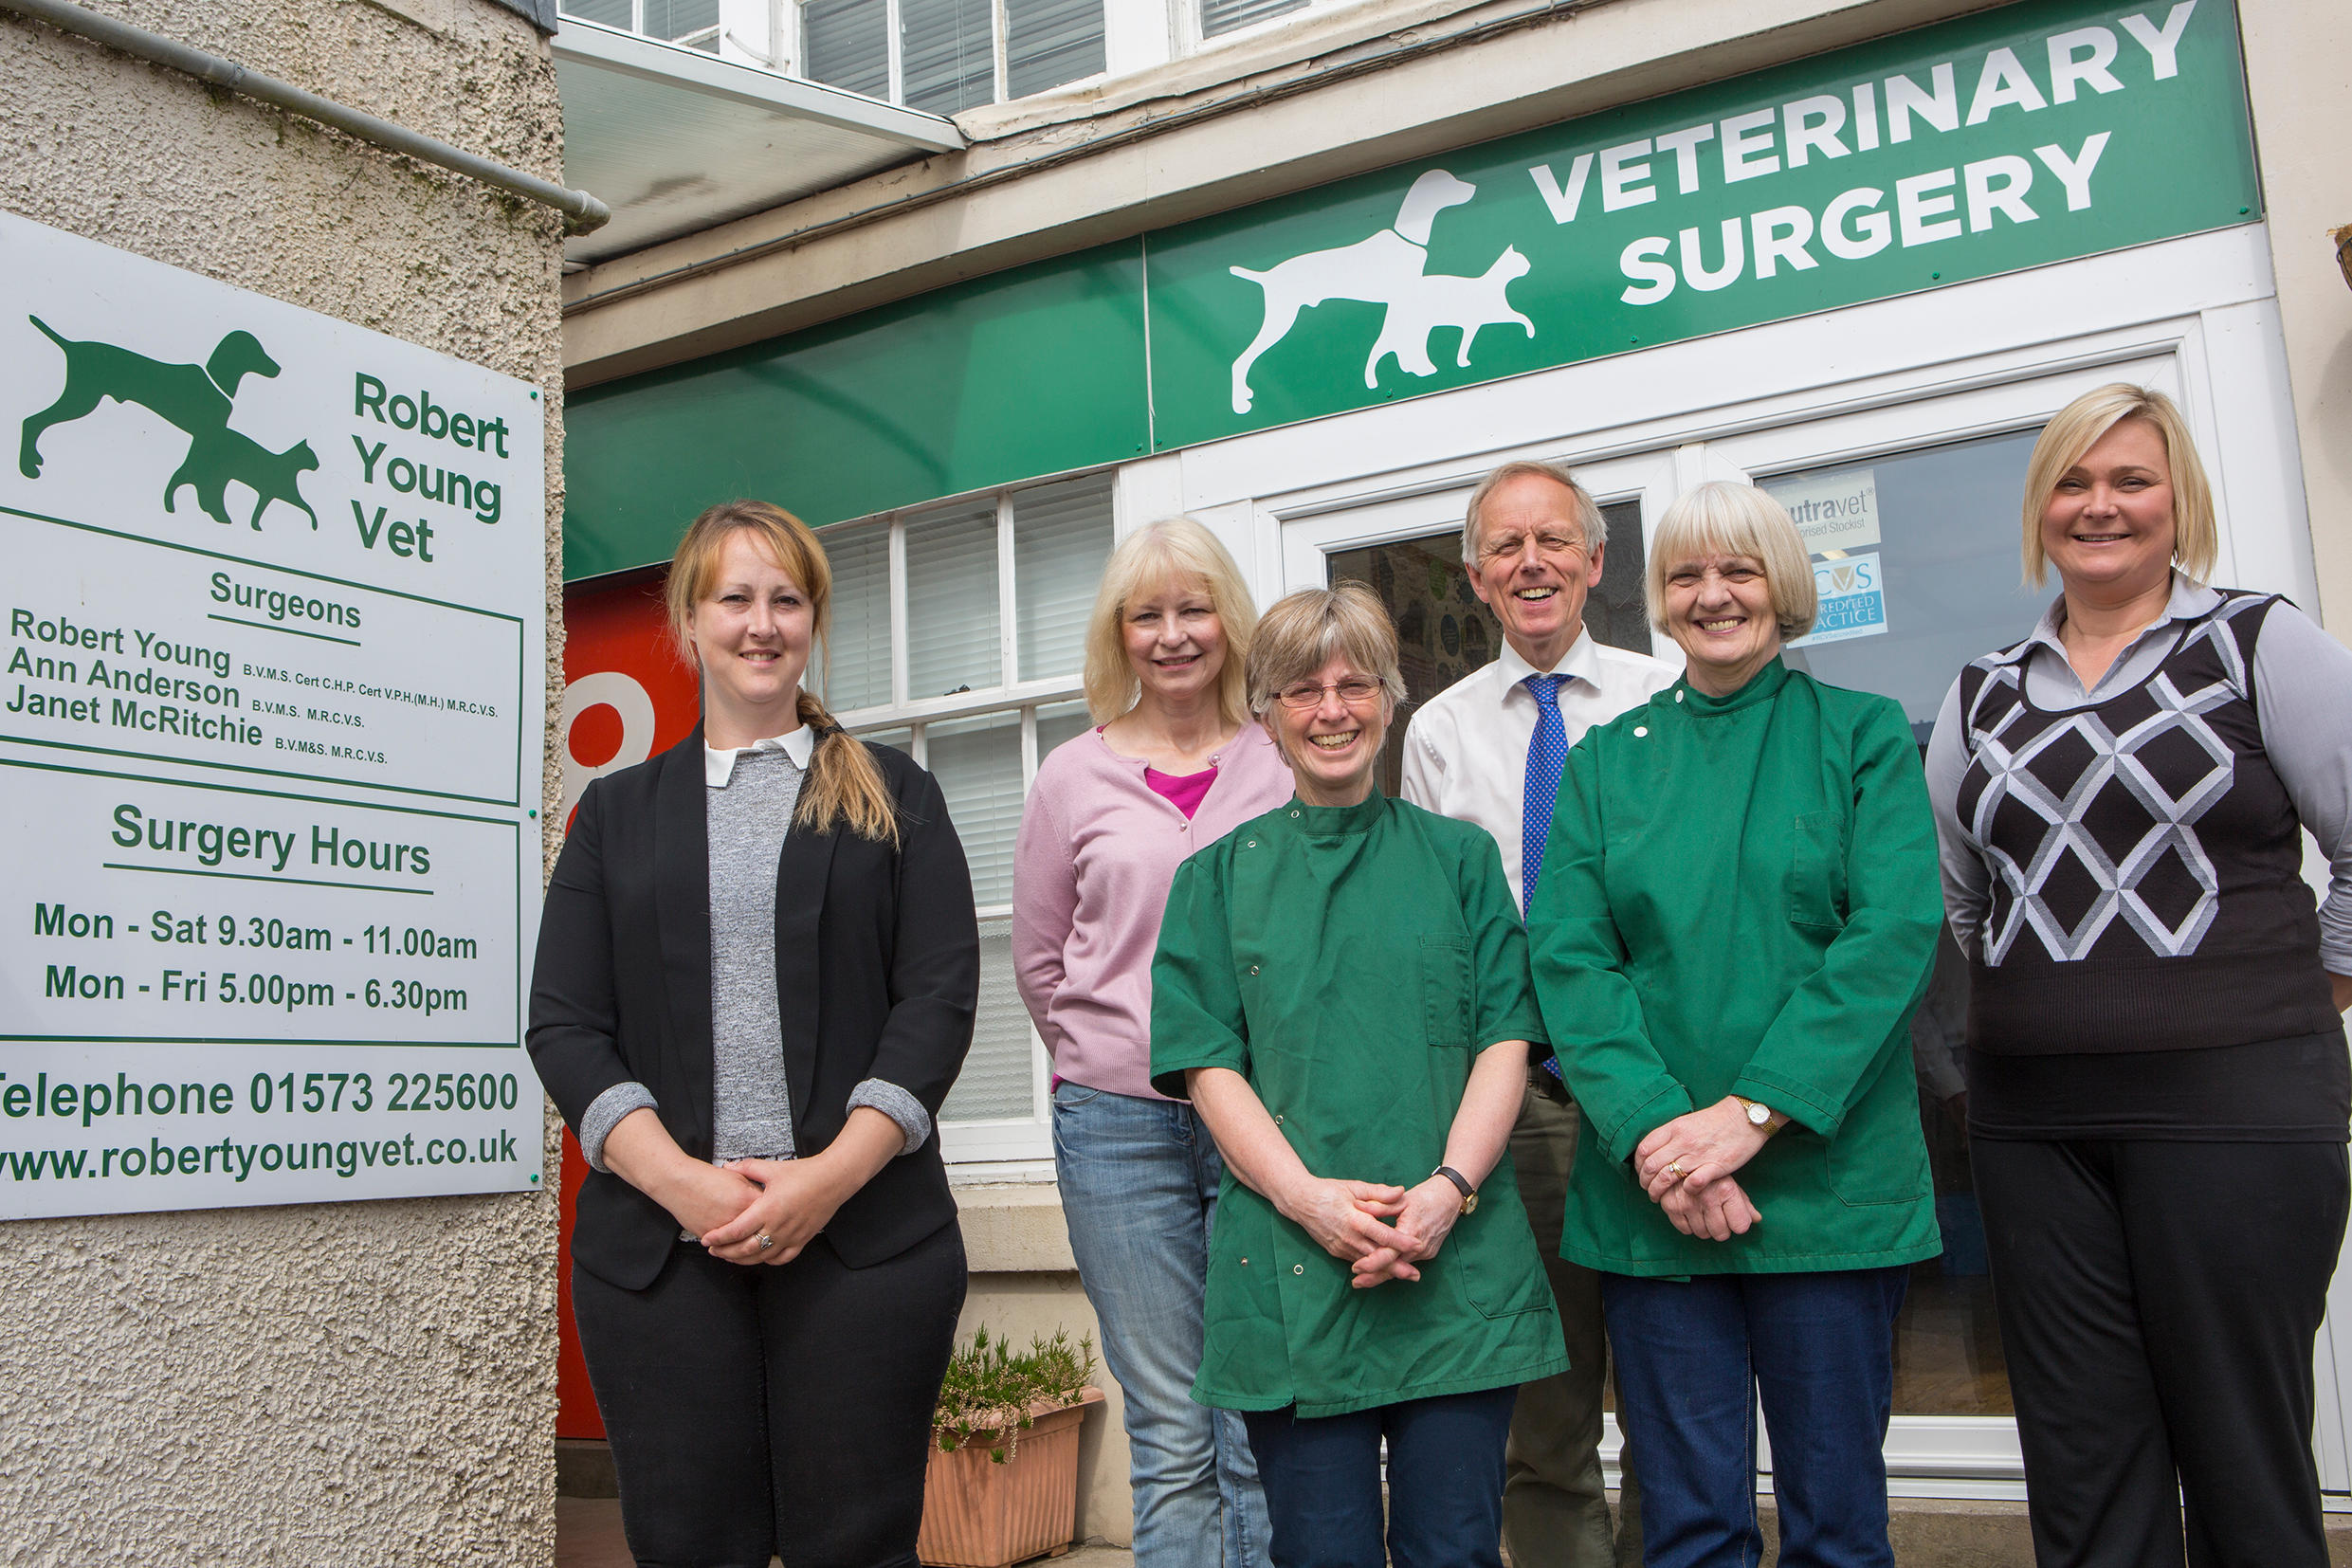 Images Border Vets, Earlston